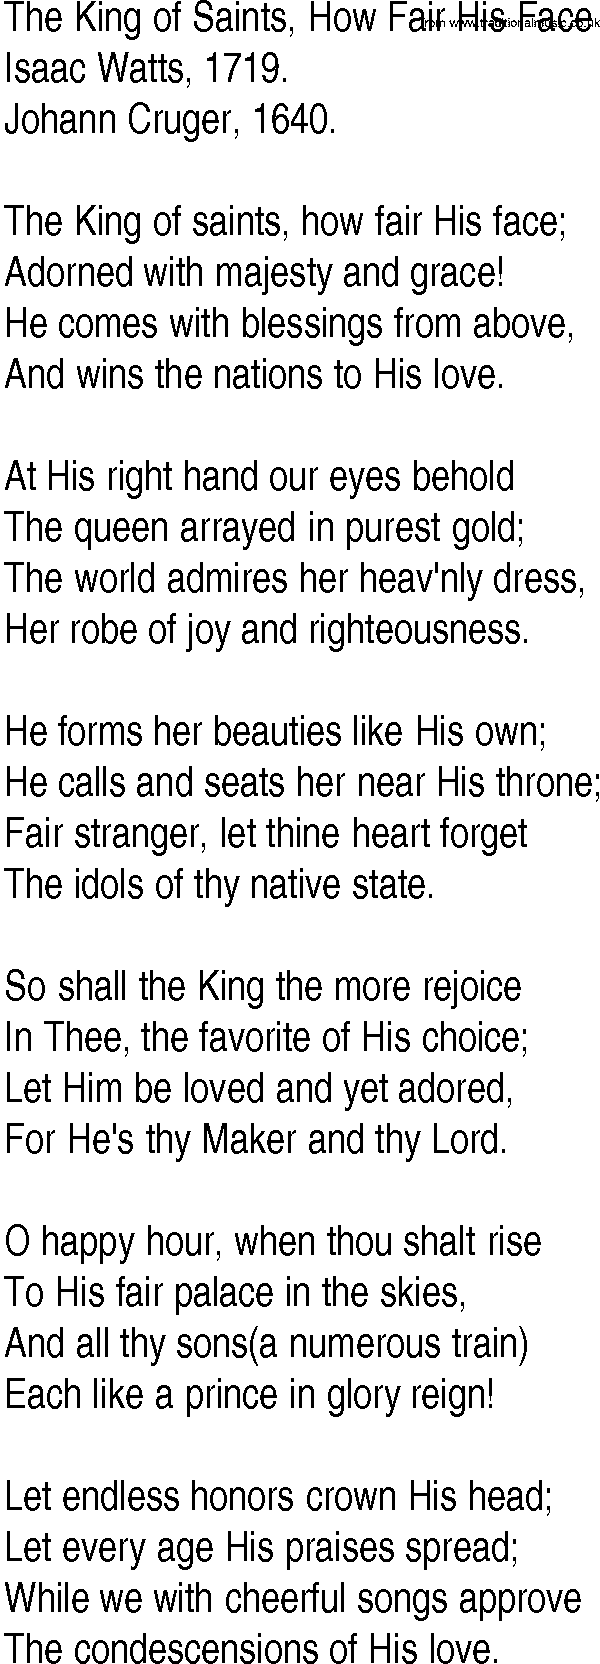 Hymn and Gospel Song: The King of Saints, How Fair His Face by Isaac Watts lyrics